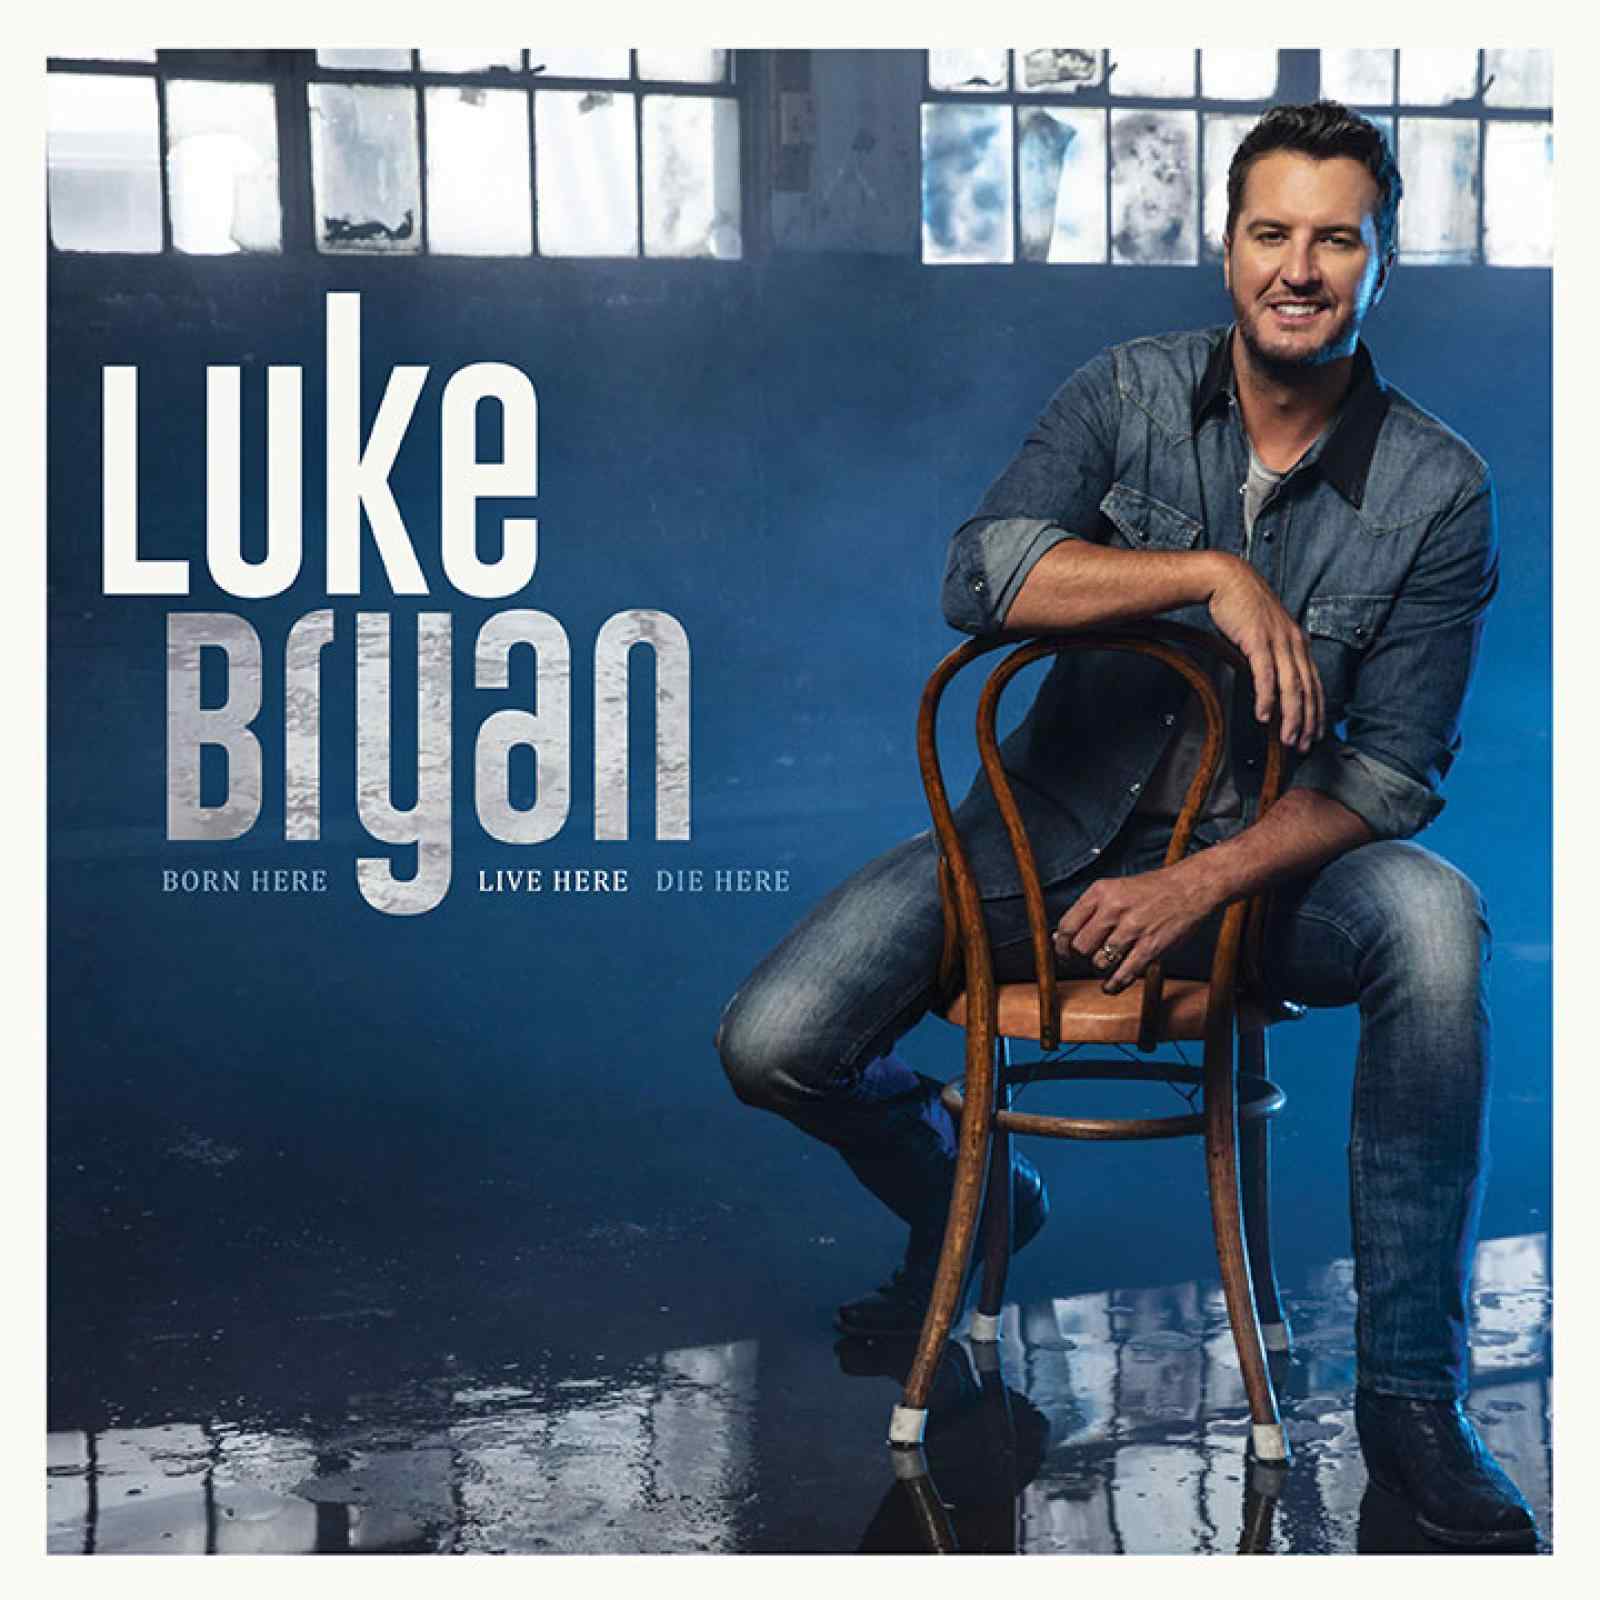 Luke Bryan Reveals BORN HERE  LIVE HERE  DIE HERE Album Cover and Track Listing